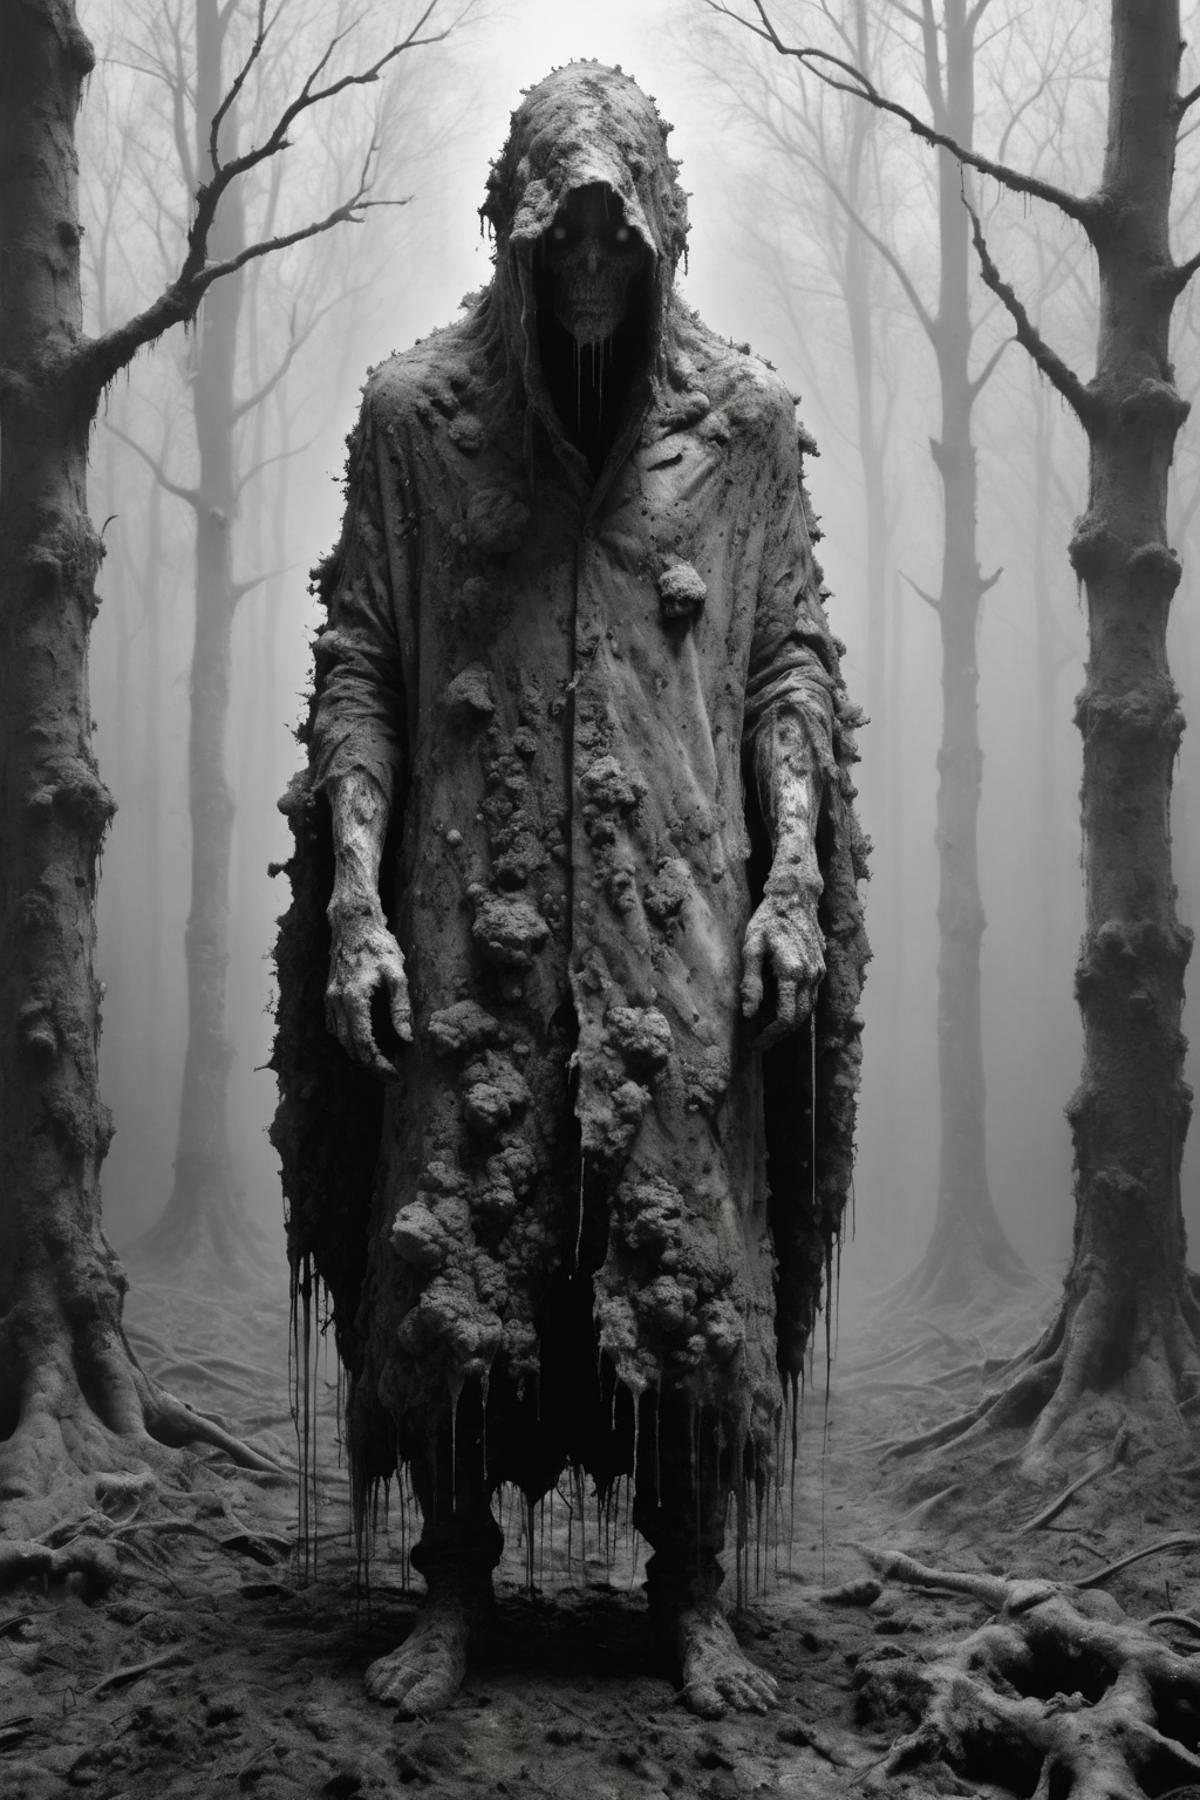 A Zombie Wandering Through a Forest with Dripping Blood and Dirt Covered Clothes